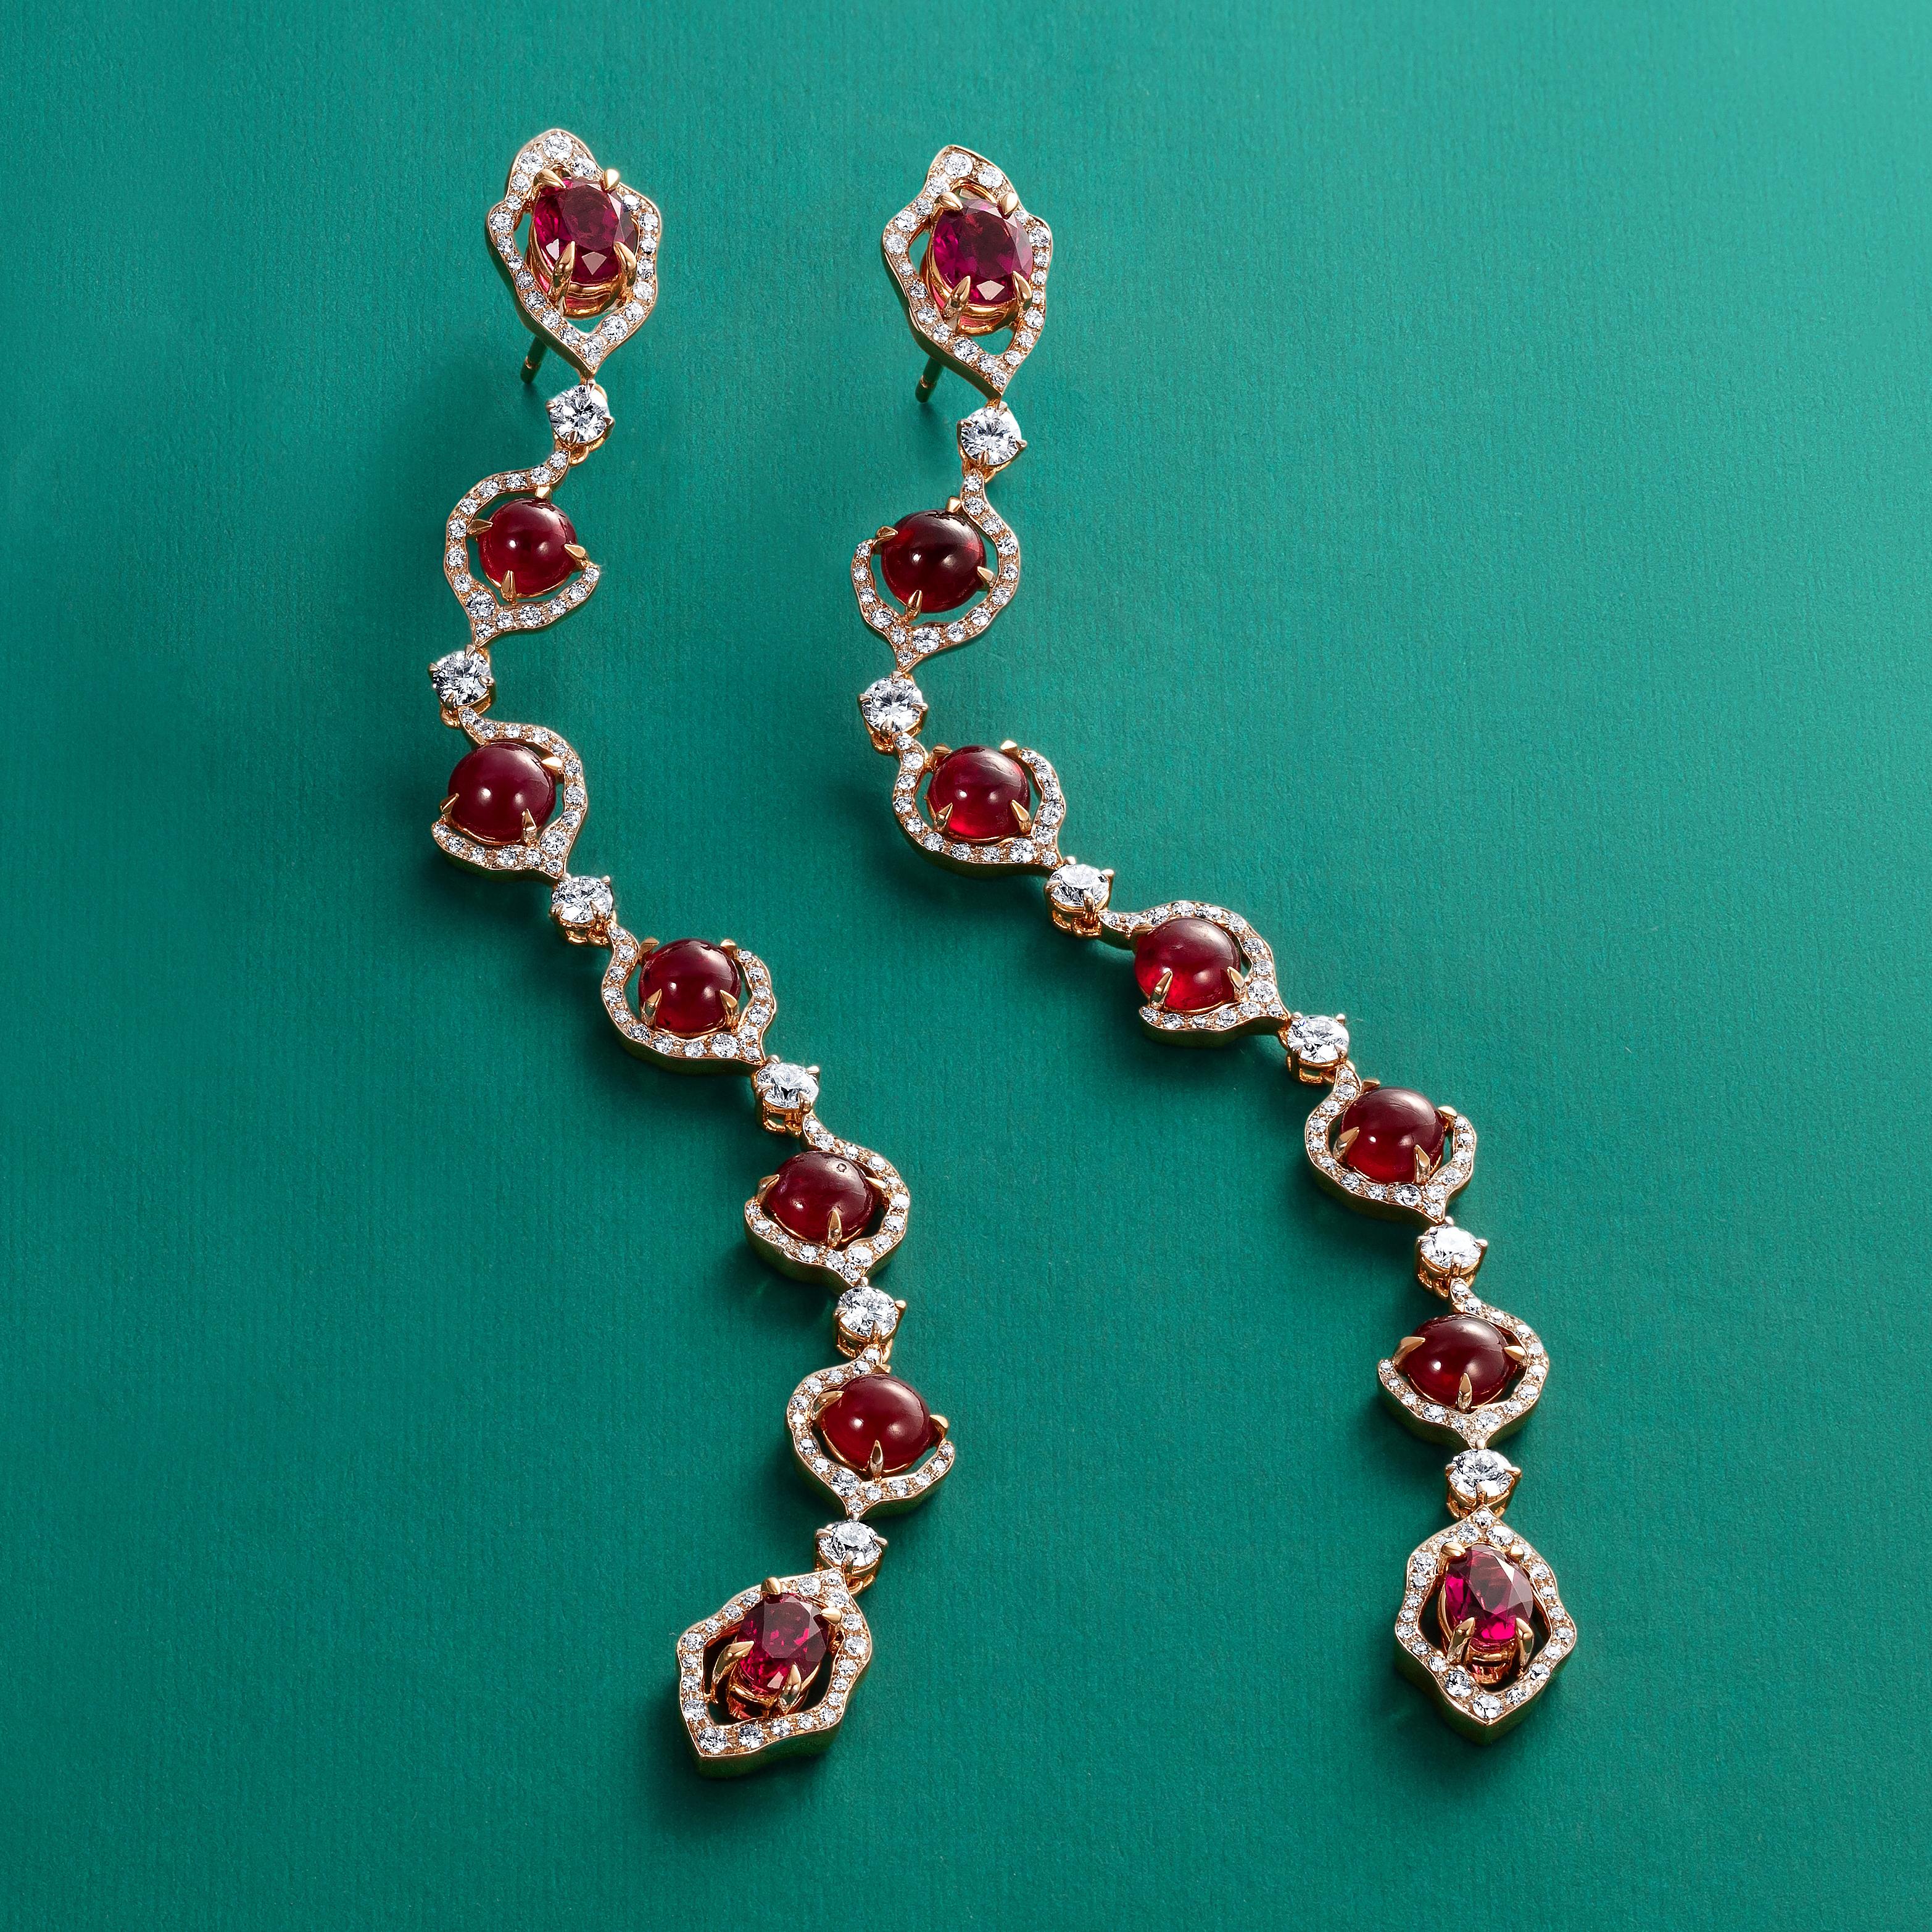 Contemporary 18 Karat Rose Gold, White Diamonds, Rubies and Rubellite Stiletto Earrings For Sale